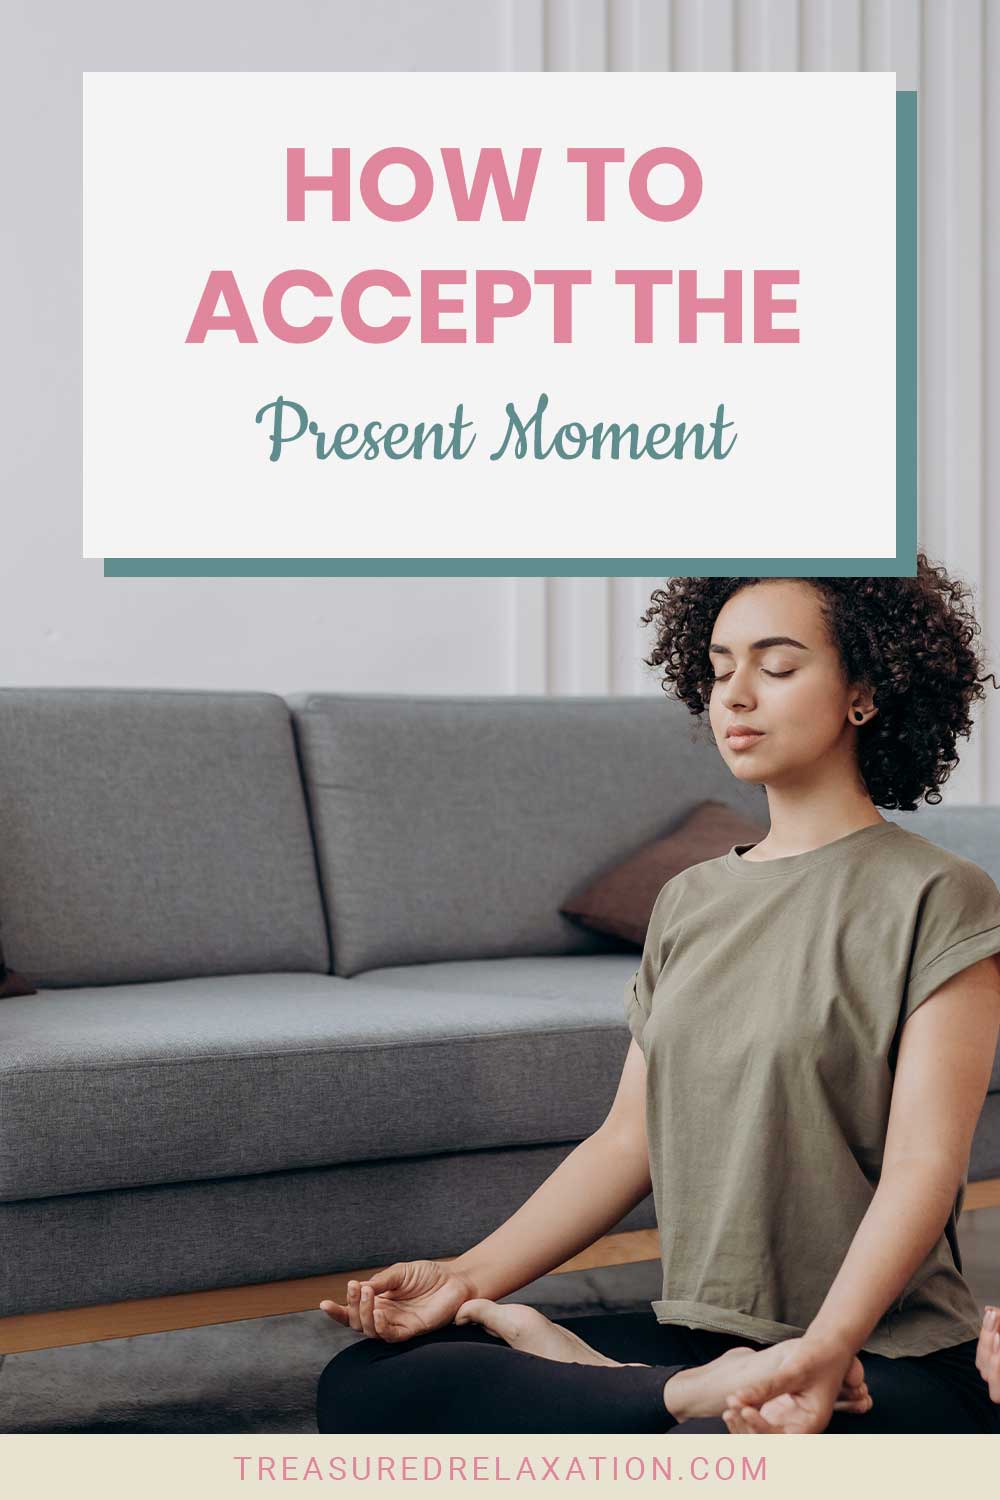 Woman meditating in a living room - How to Accept the Present Moment?